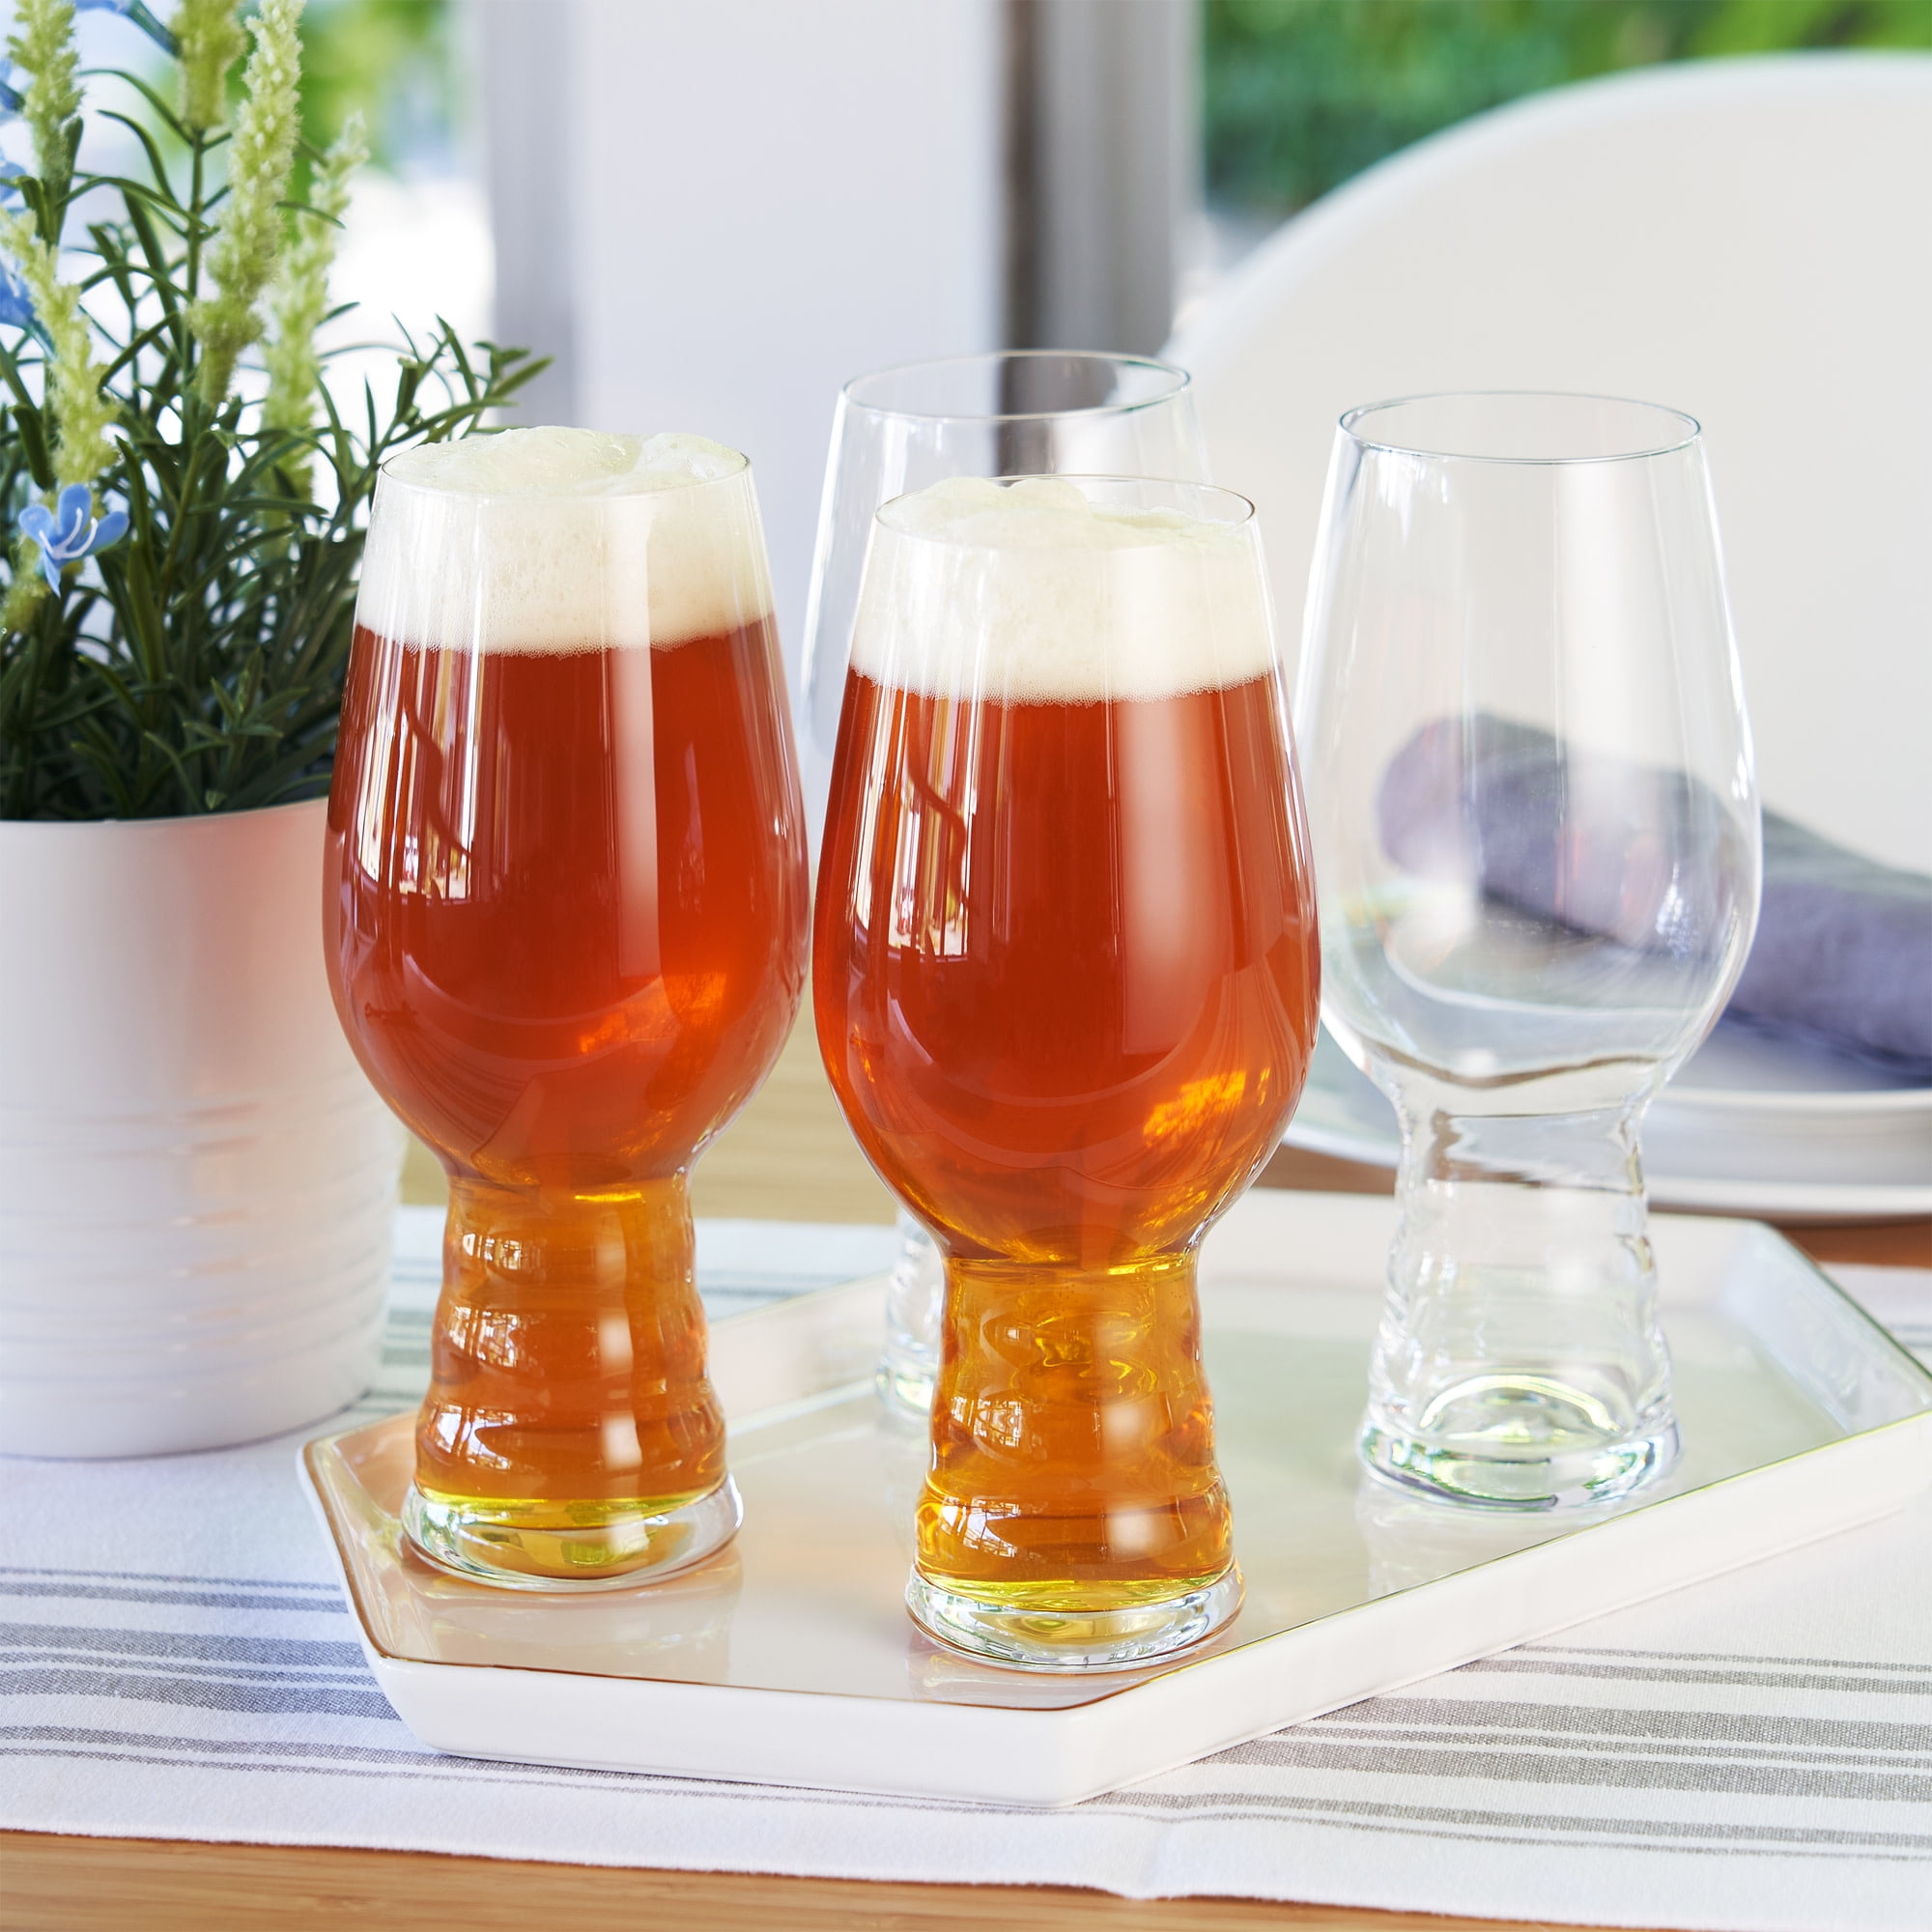 These Are The Best IPA Glasses You'll Ever Use